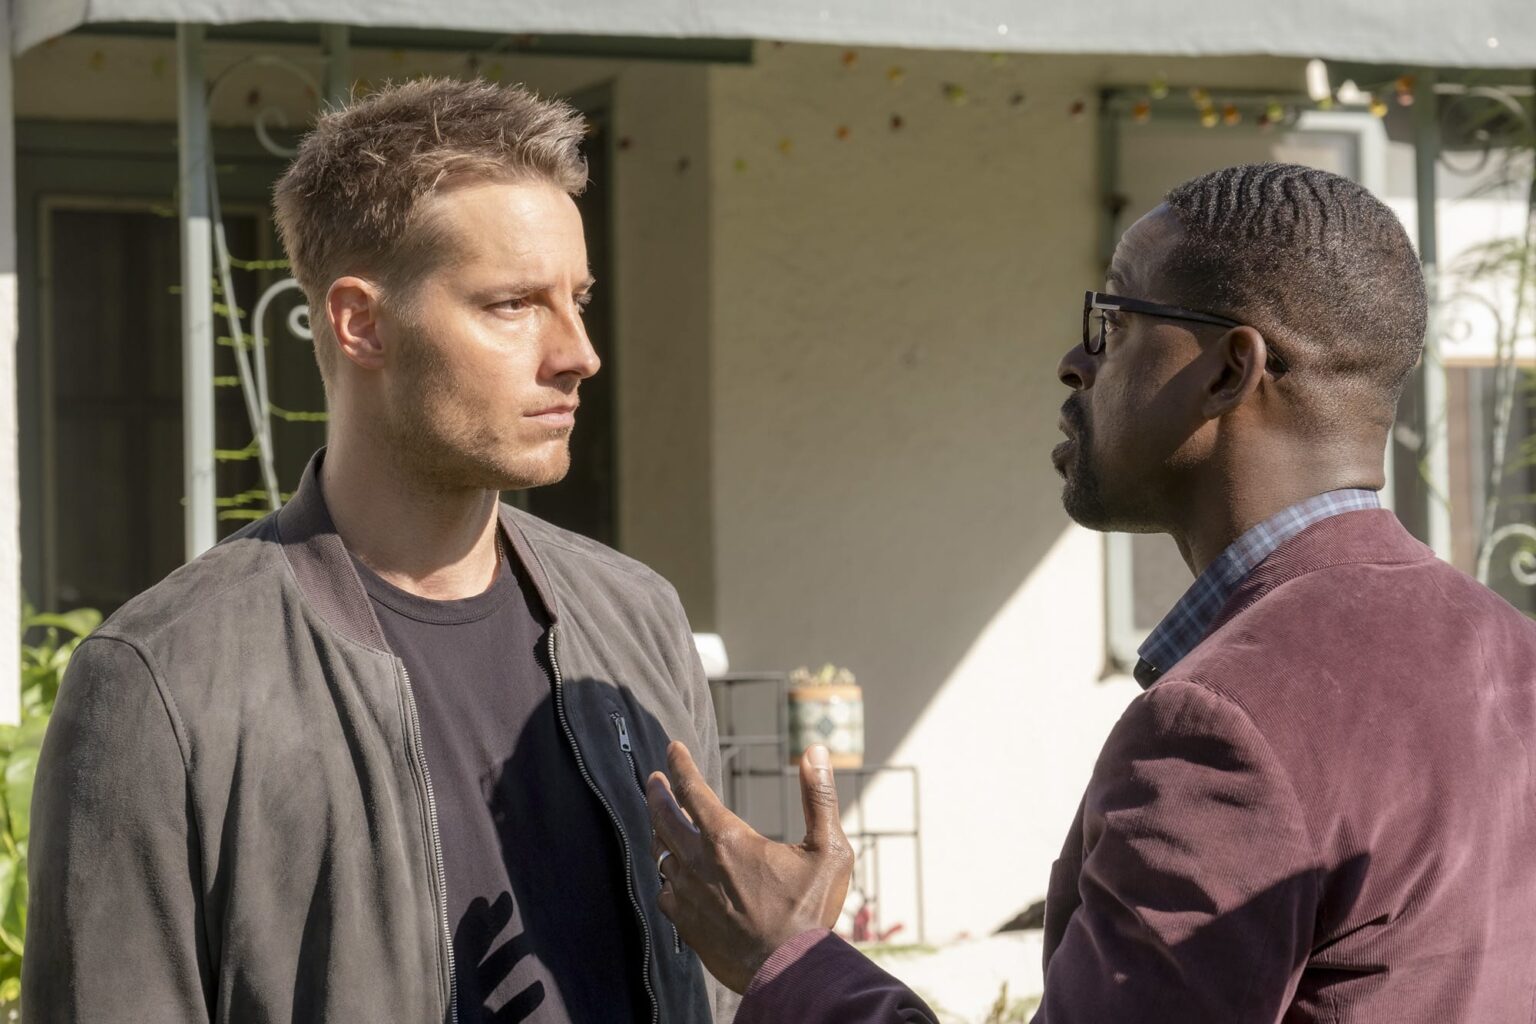 'This is Us' is hands-down one of the warmest shows to ever exist. What's going to happen between Randall and Kevin? Let's find out.